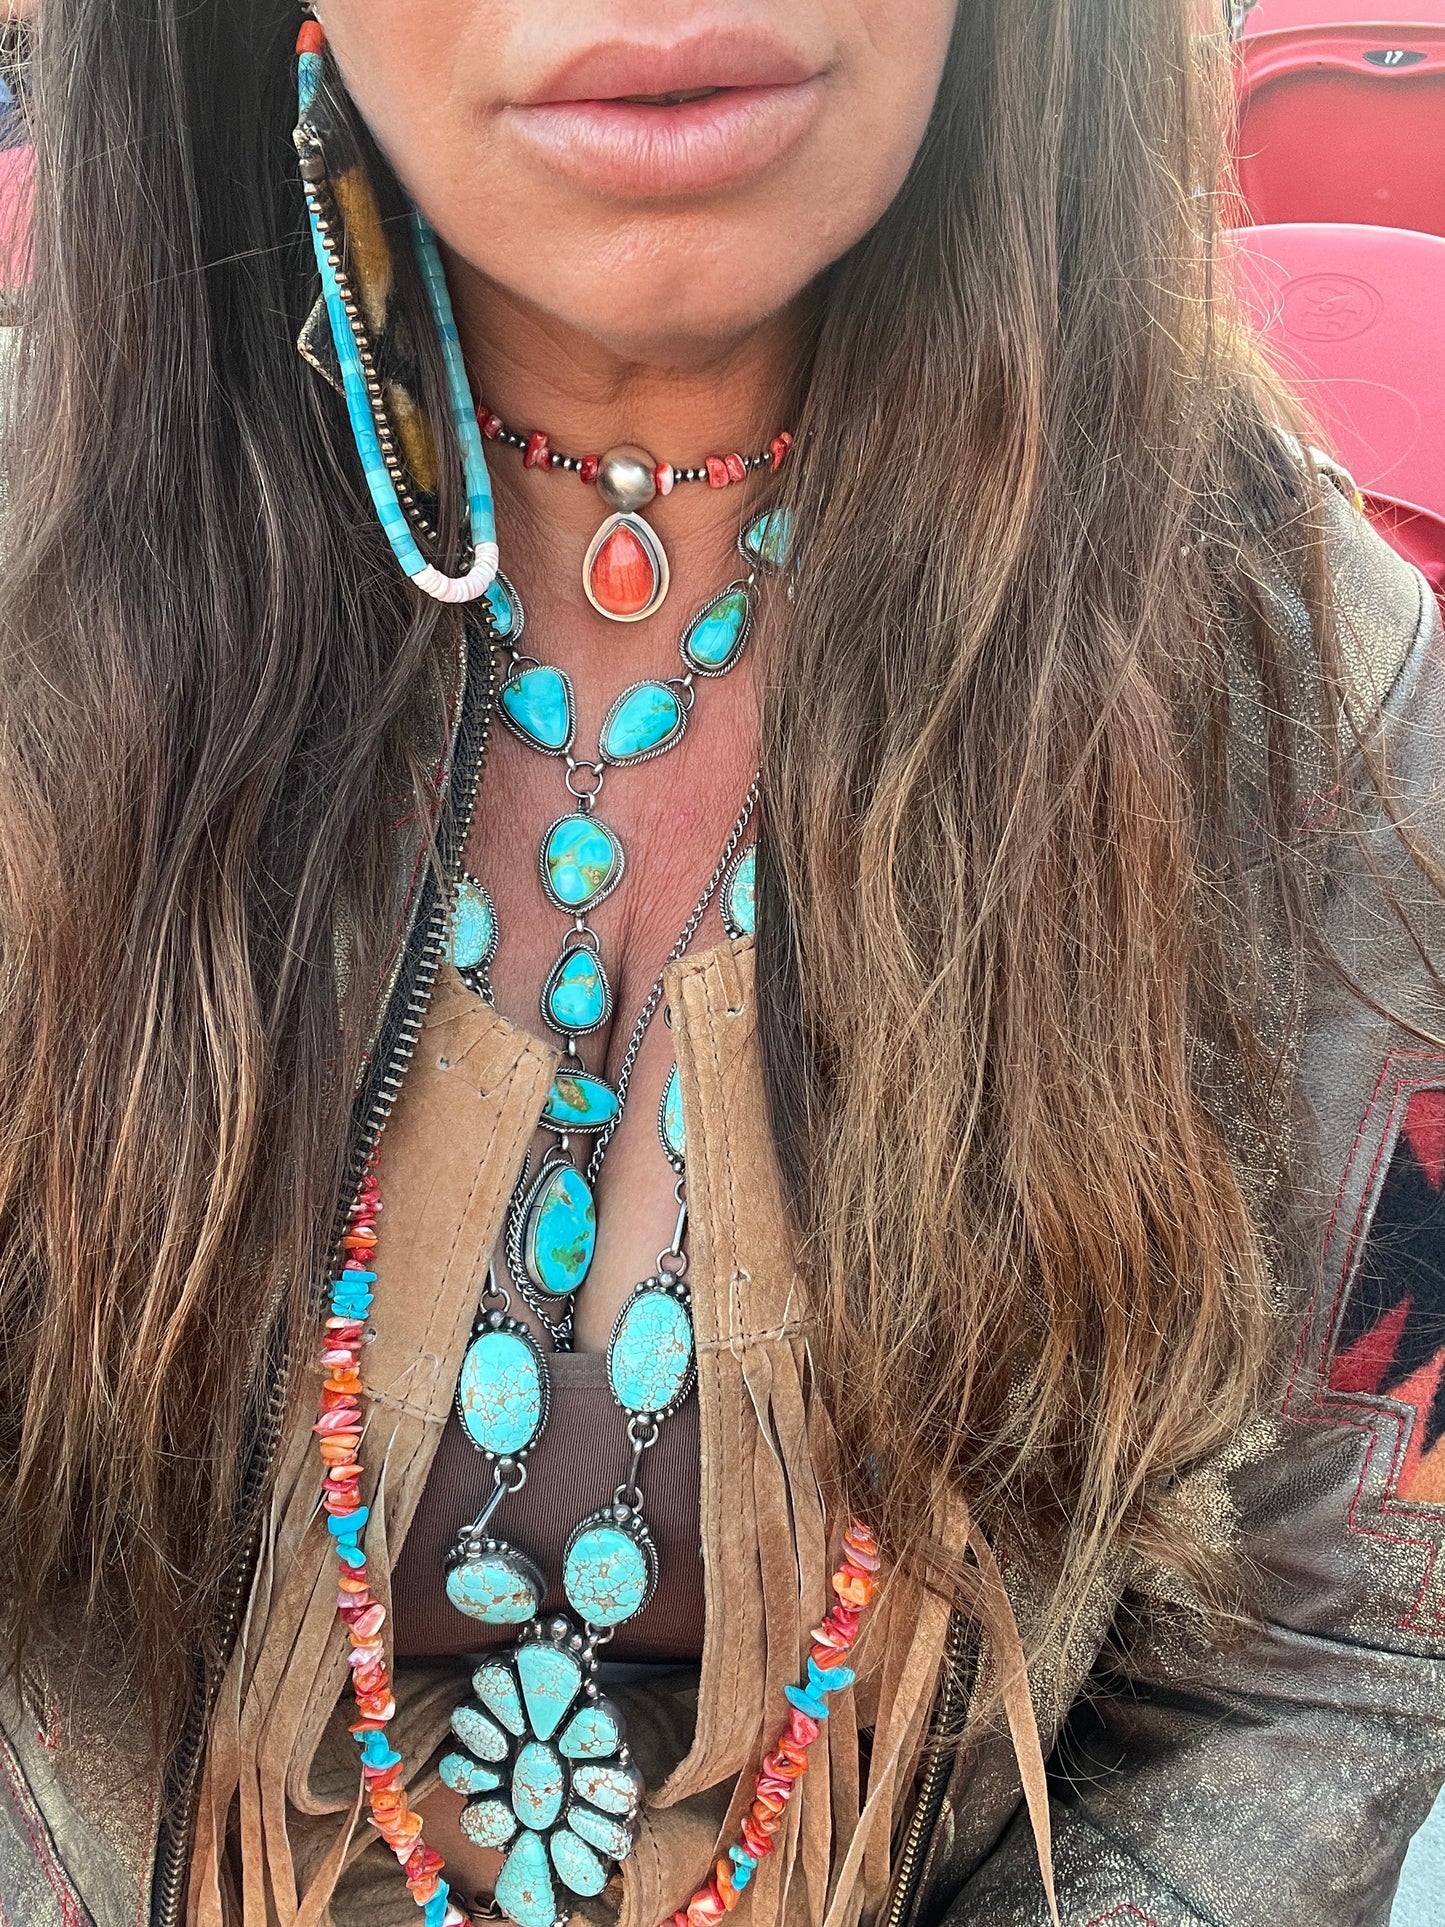 
                  
                    A person with long hair wearing a Stunning Sonora Gold Lariat Necklace And Earrings Set, a brown fringed top, and a jacket featuring an authentic Native American handmade textured rope design.
                  
                